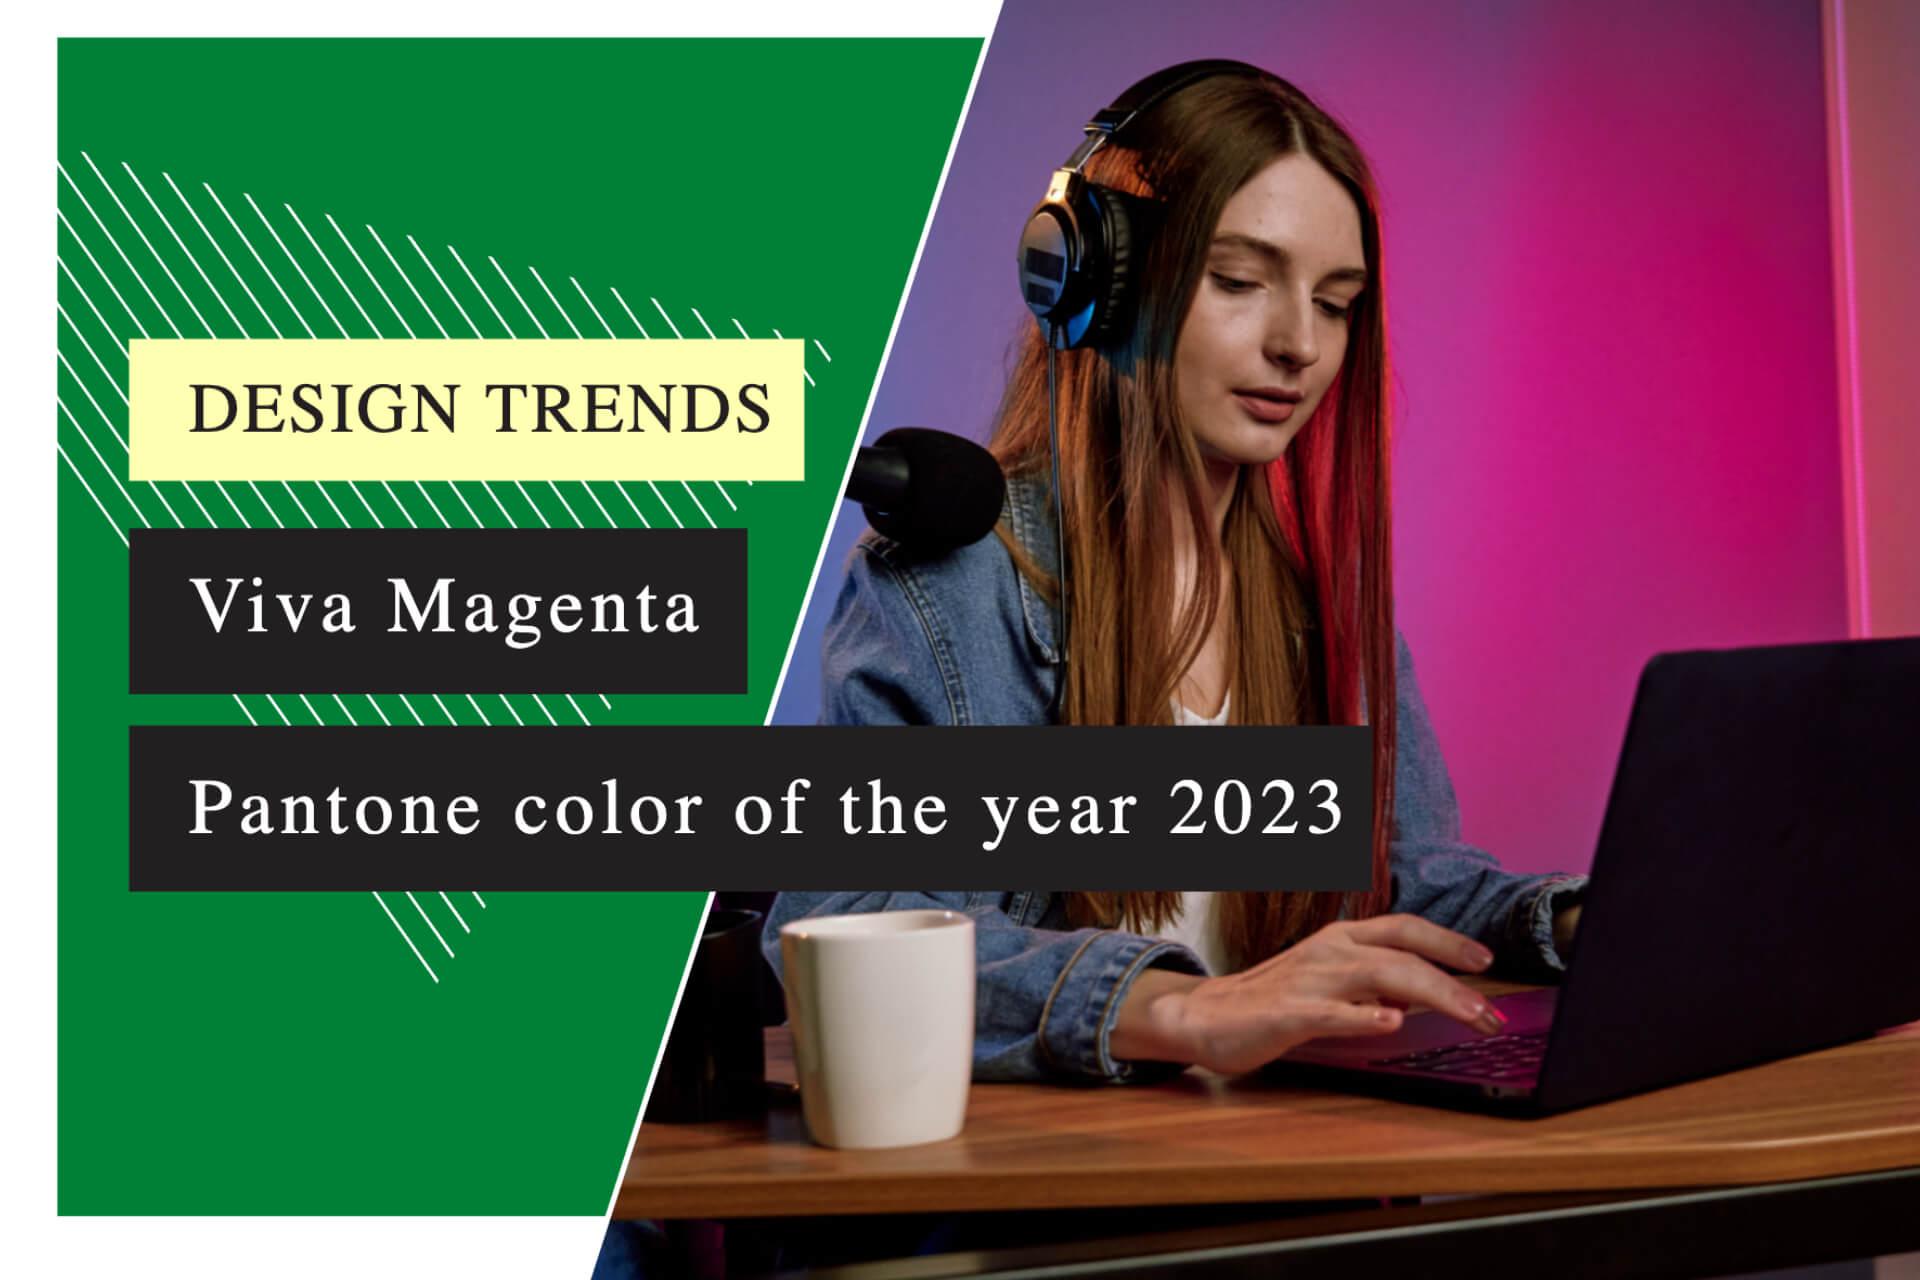 Viva Magenta Pantone color of the year 2023 inspires illustration and background ideas